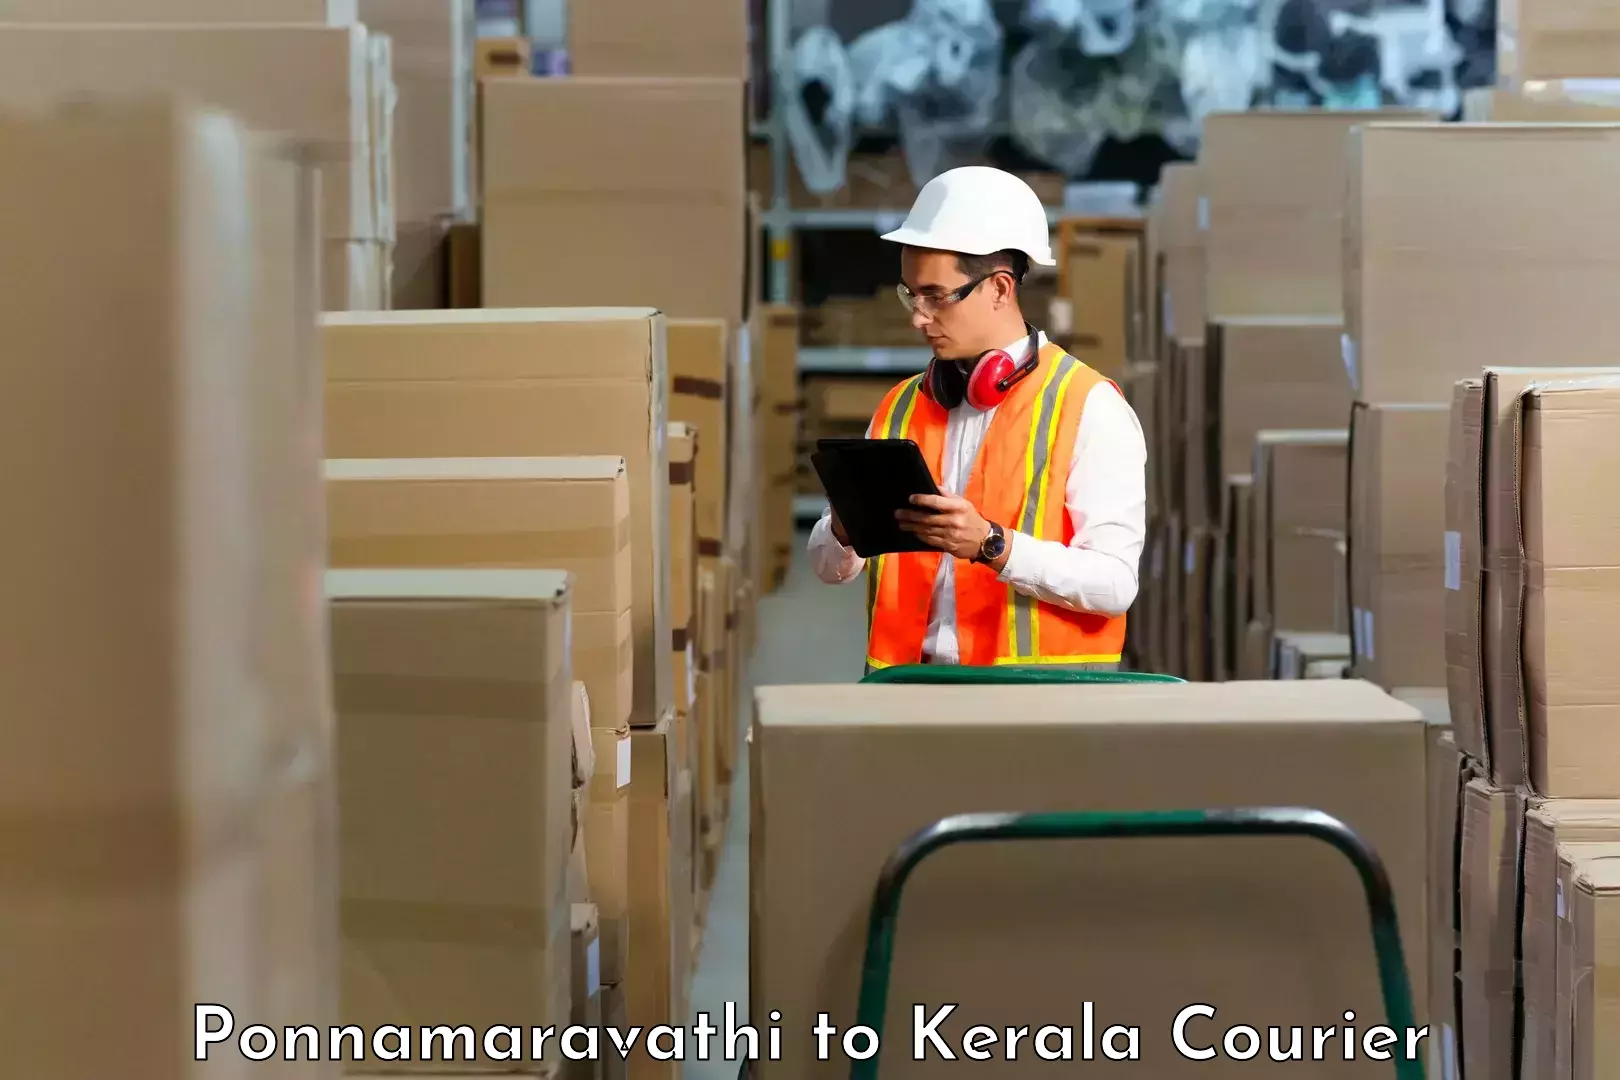 Large-scale shipping solutions Ponnamaravathi to Cochin University of Science and Technology